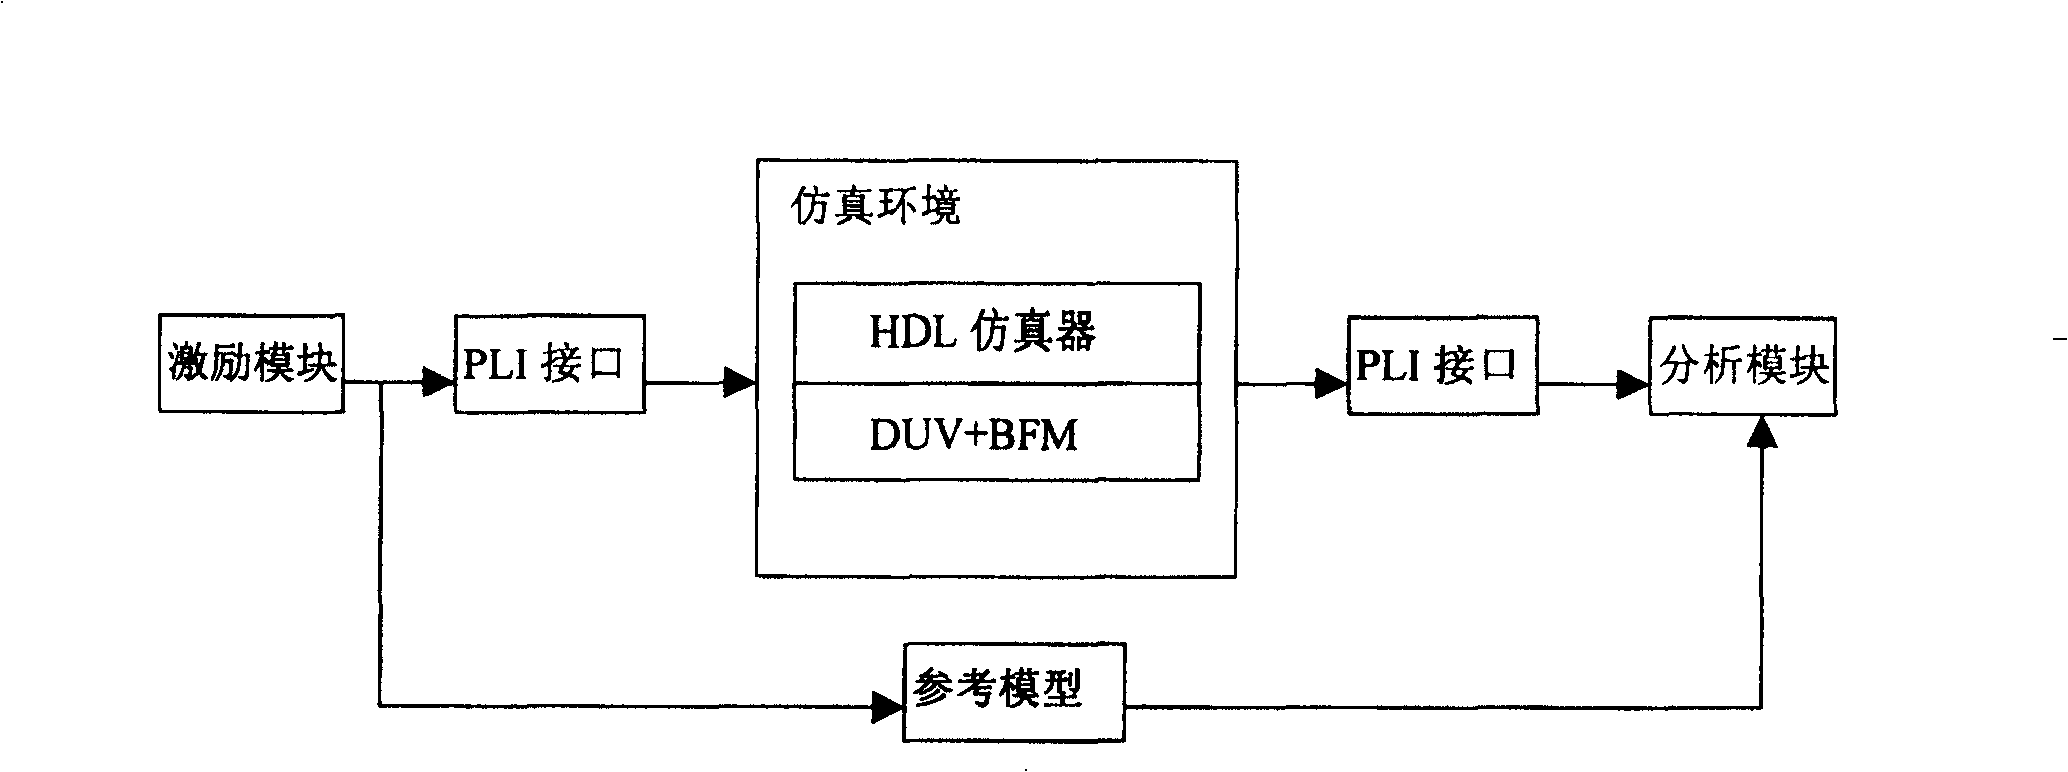 Method and device for information transmission